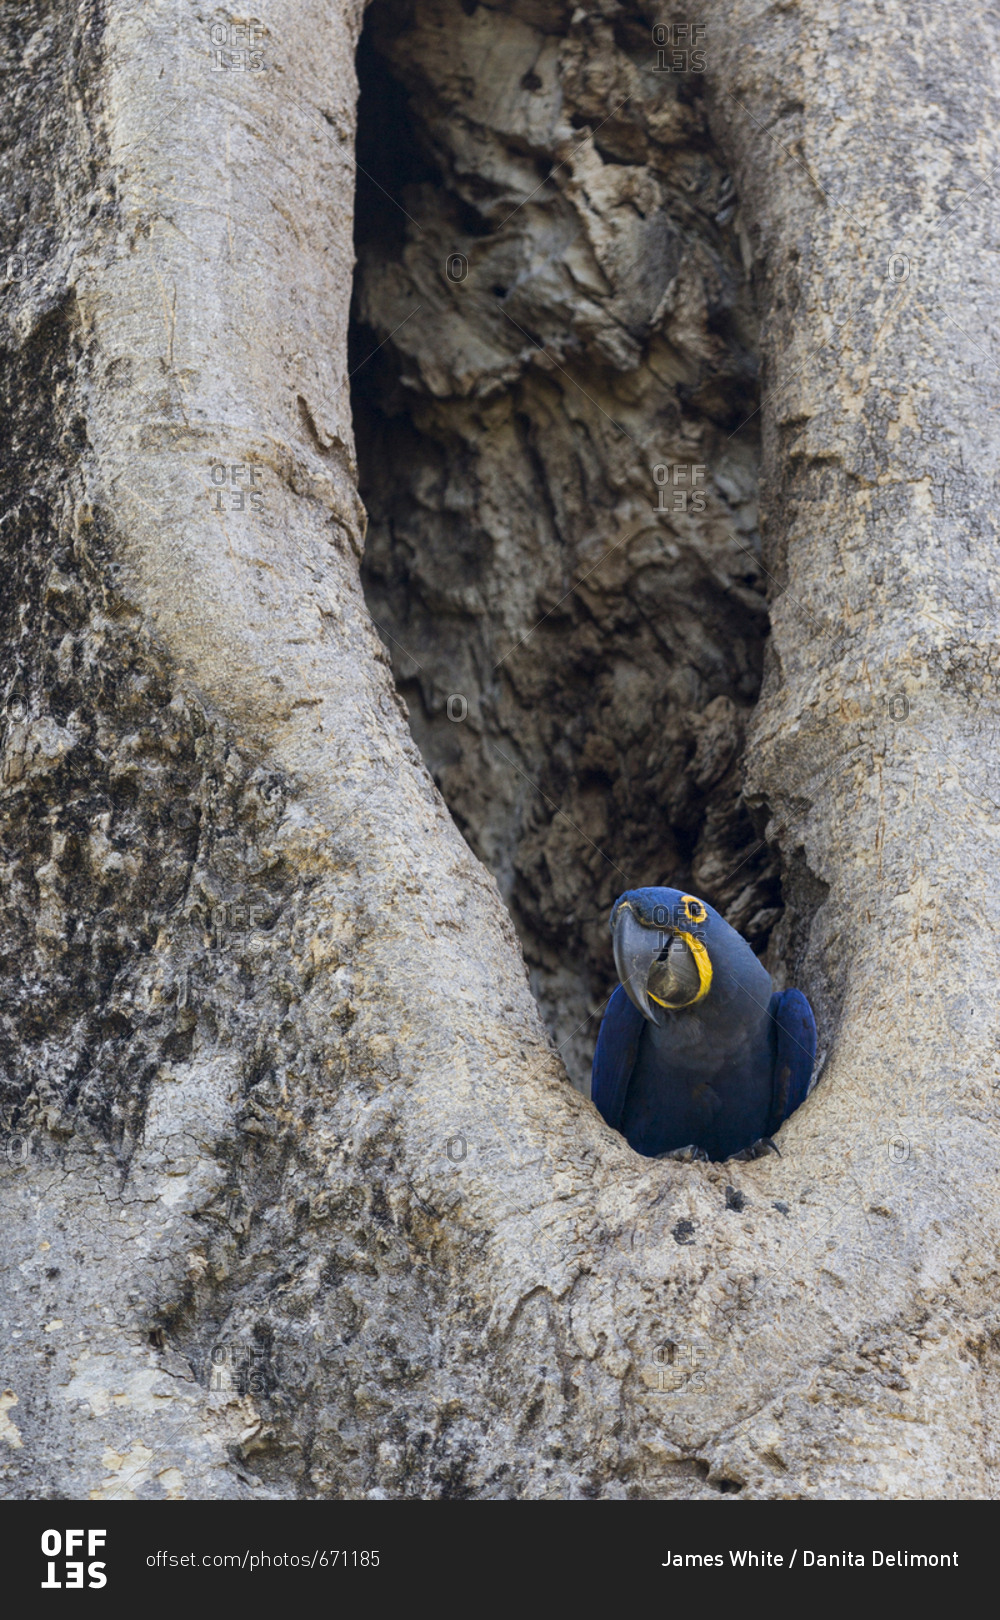 Hyacinth Macaw (the largest macaw and the largest flying parrot) in its nest in the Brazilian Pantanal